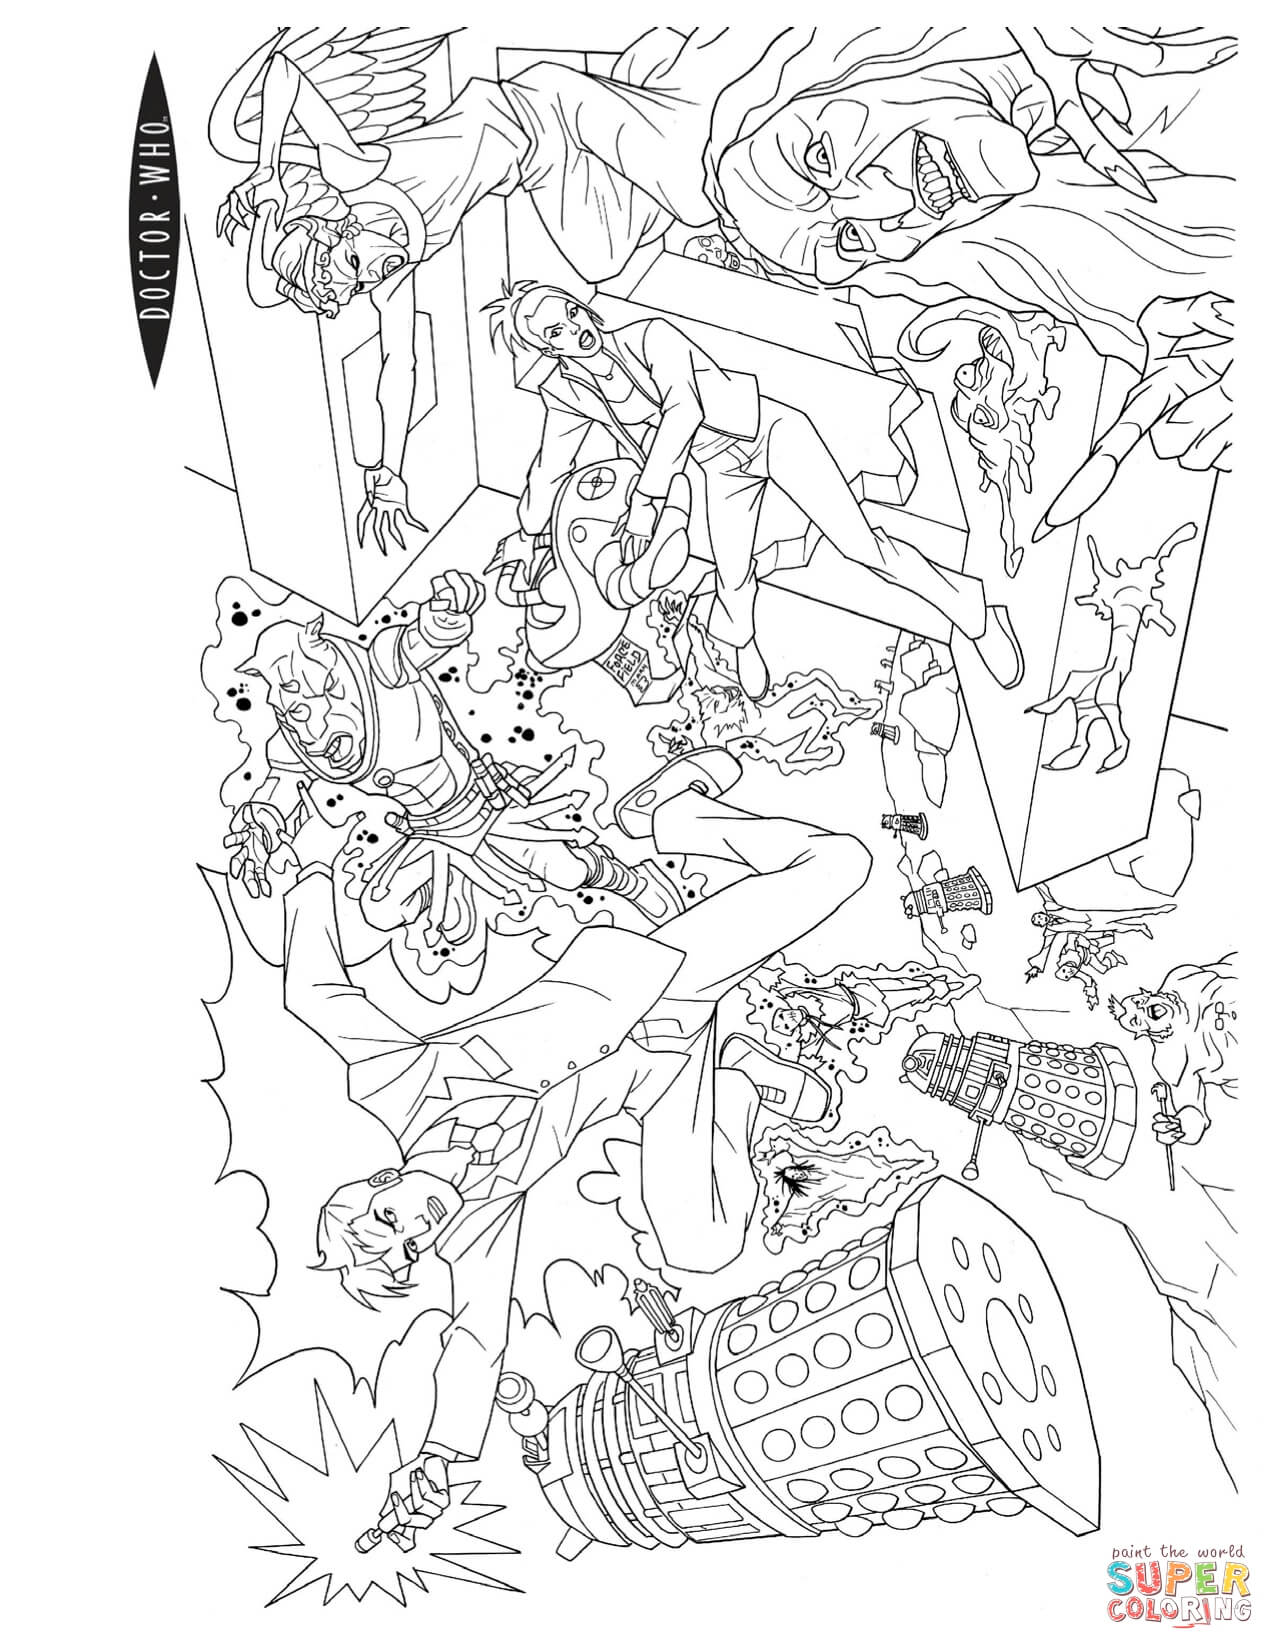 Doctor Who Action Scene coloring page | Free Printable Coloring Pages